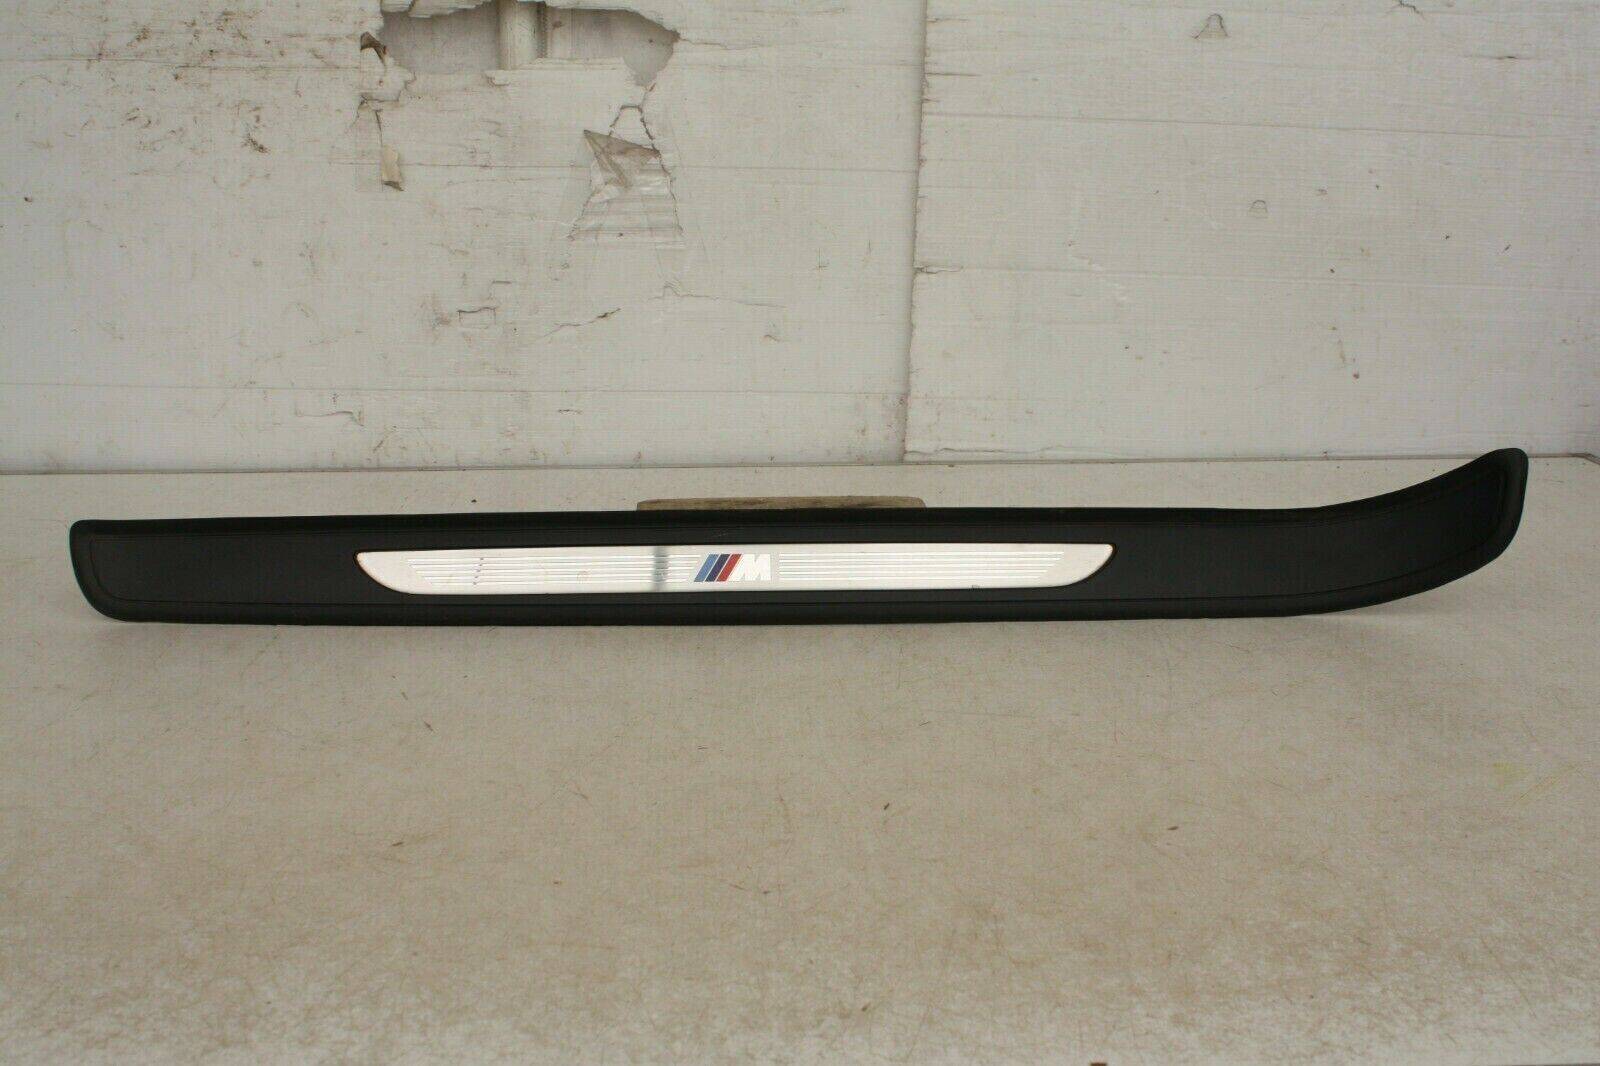 BMW-3-SERIES-FRONT-LEFT-DOOR-ENTRANCE-SILL-STRIP-2006-TO-2010-175431720438